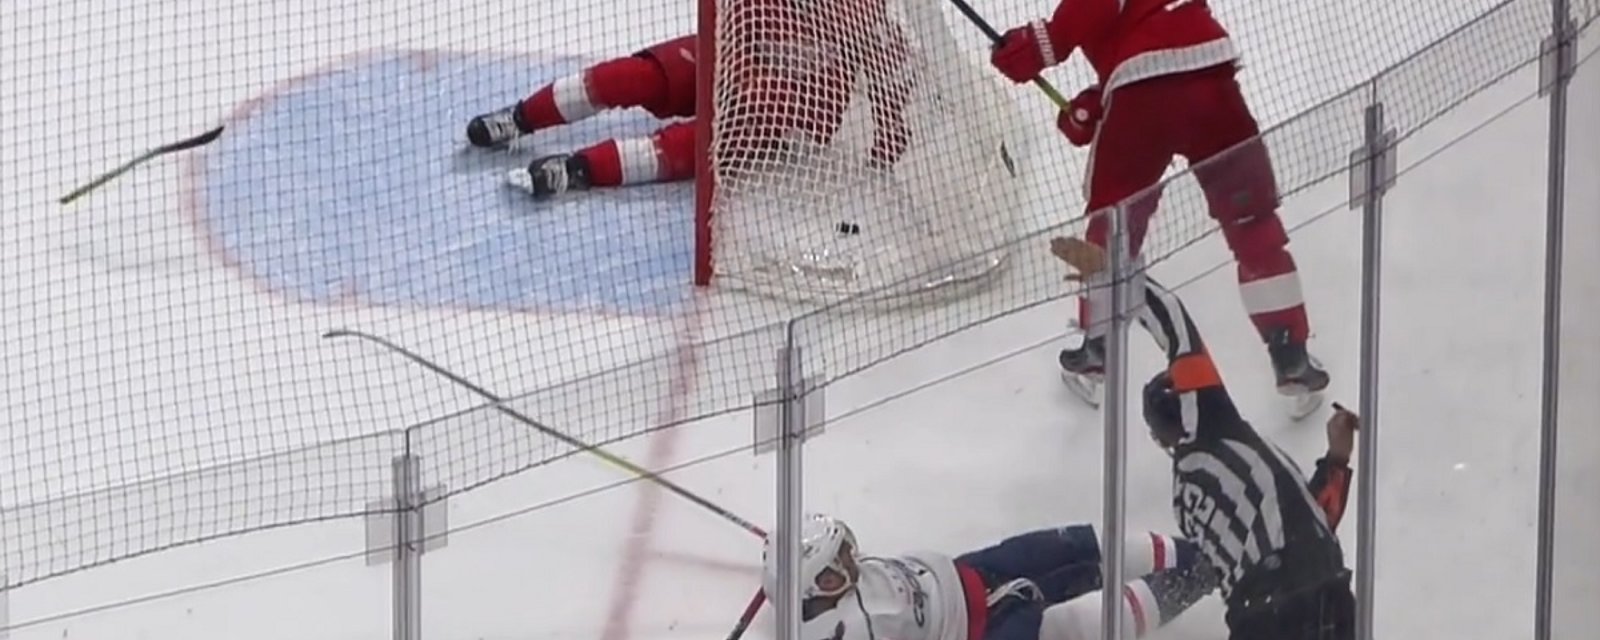 Larkin says his late hit on Alex Ovechkin was unintentional.